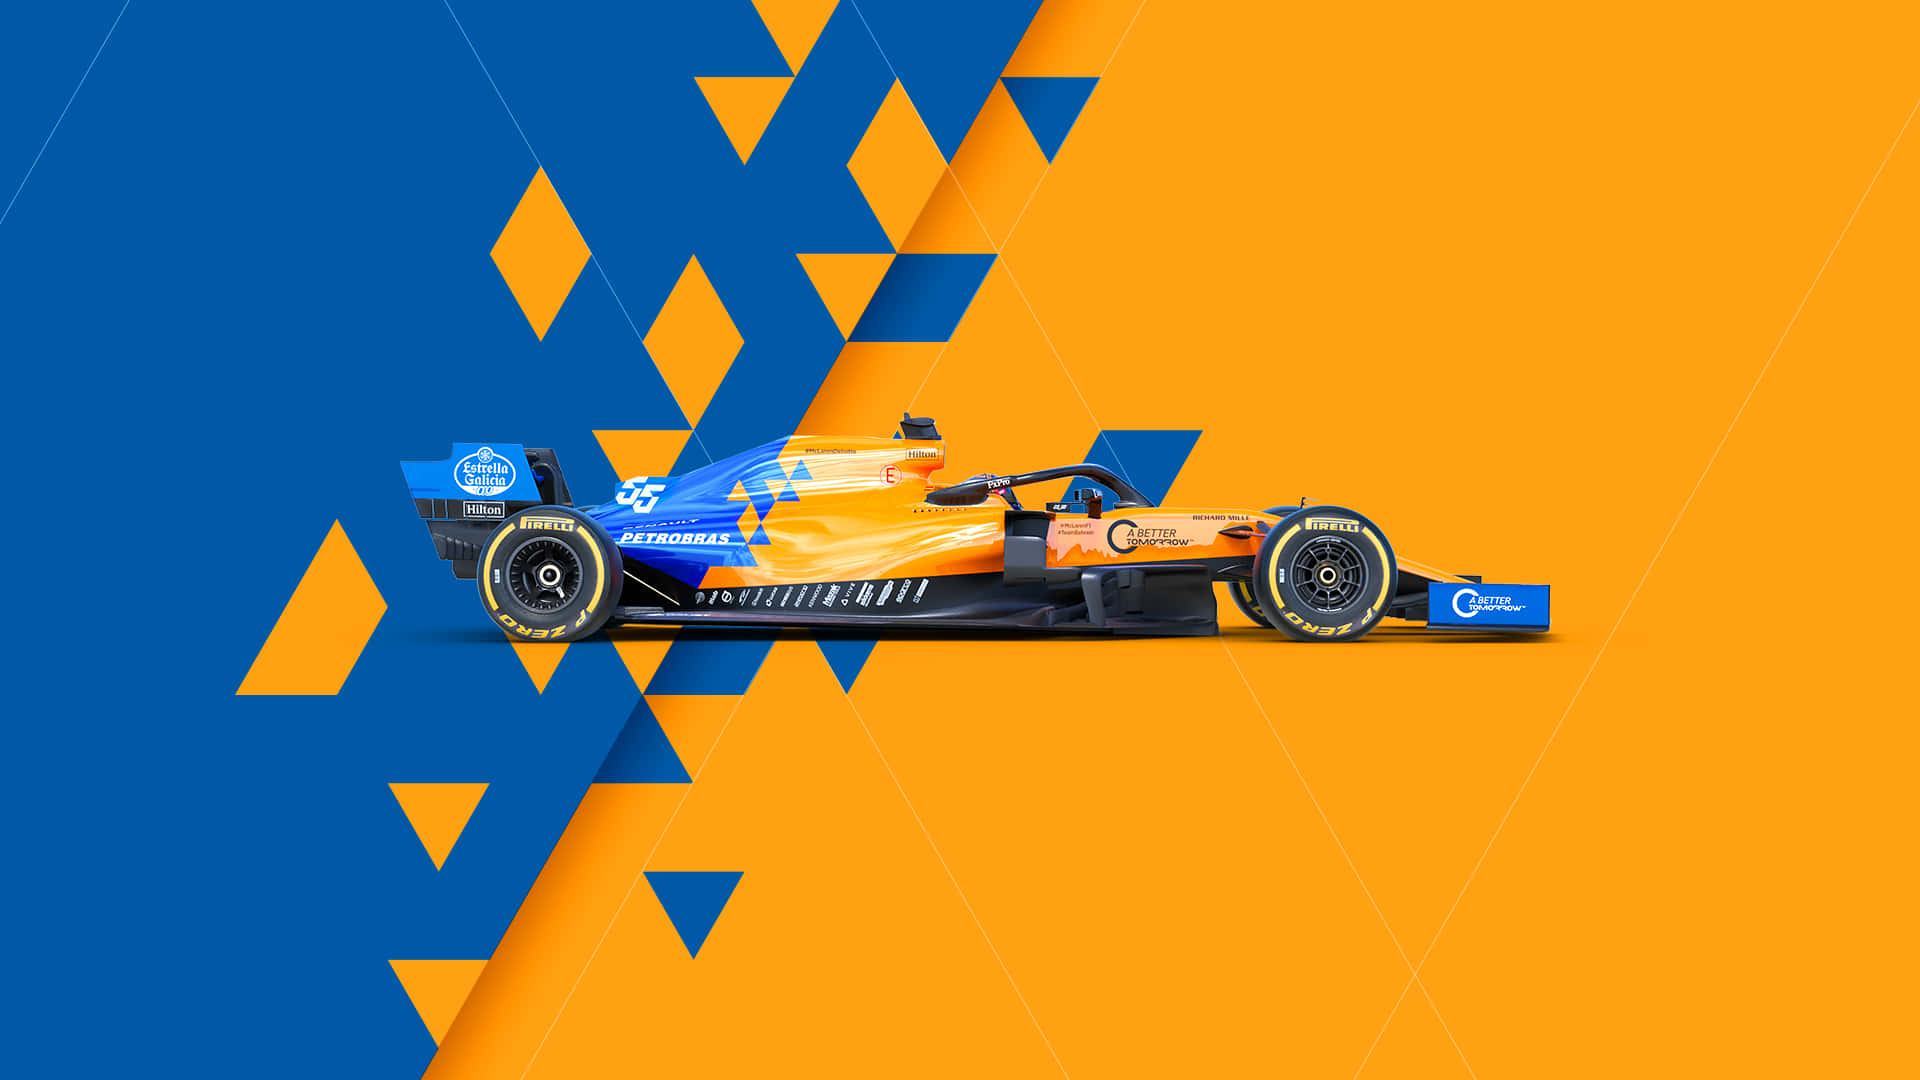 A Blue And Orange Racing Car On A Blue And Orange Background